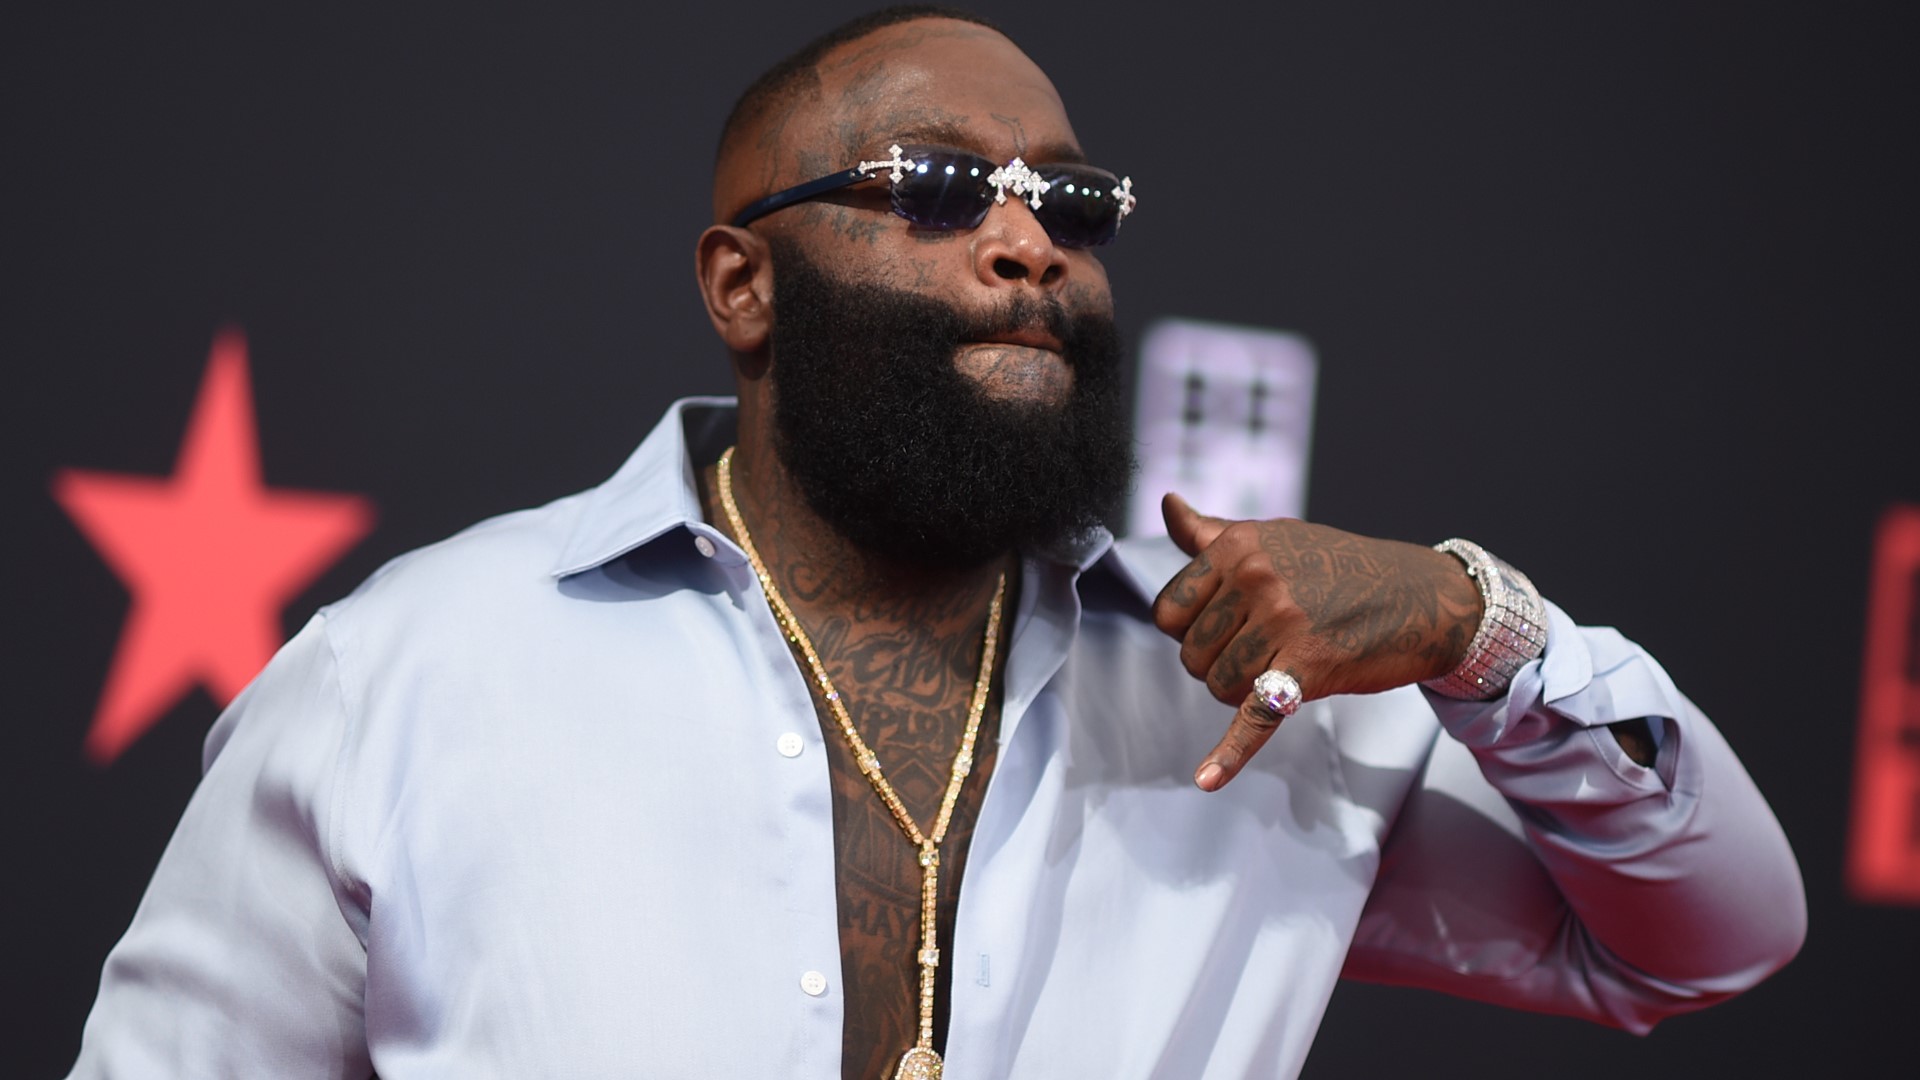 rick-ross-looks-back-at-white-house-ankle-monitor-incident-with-laughter